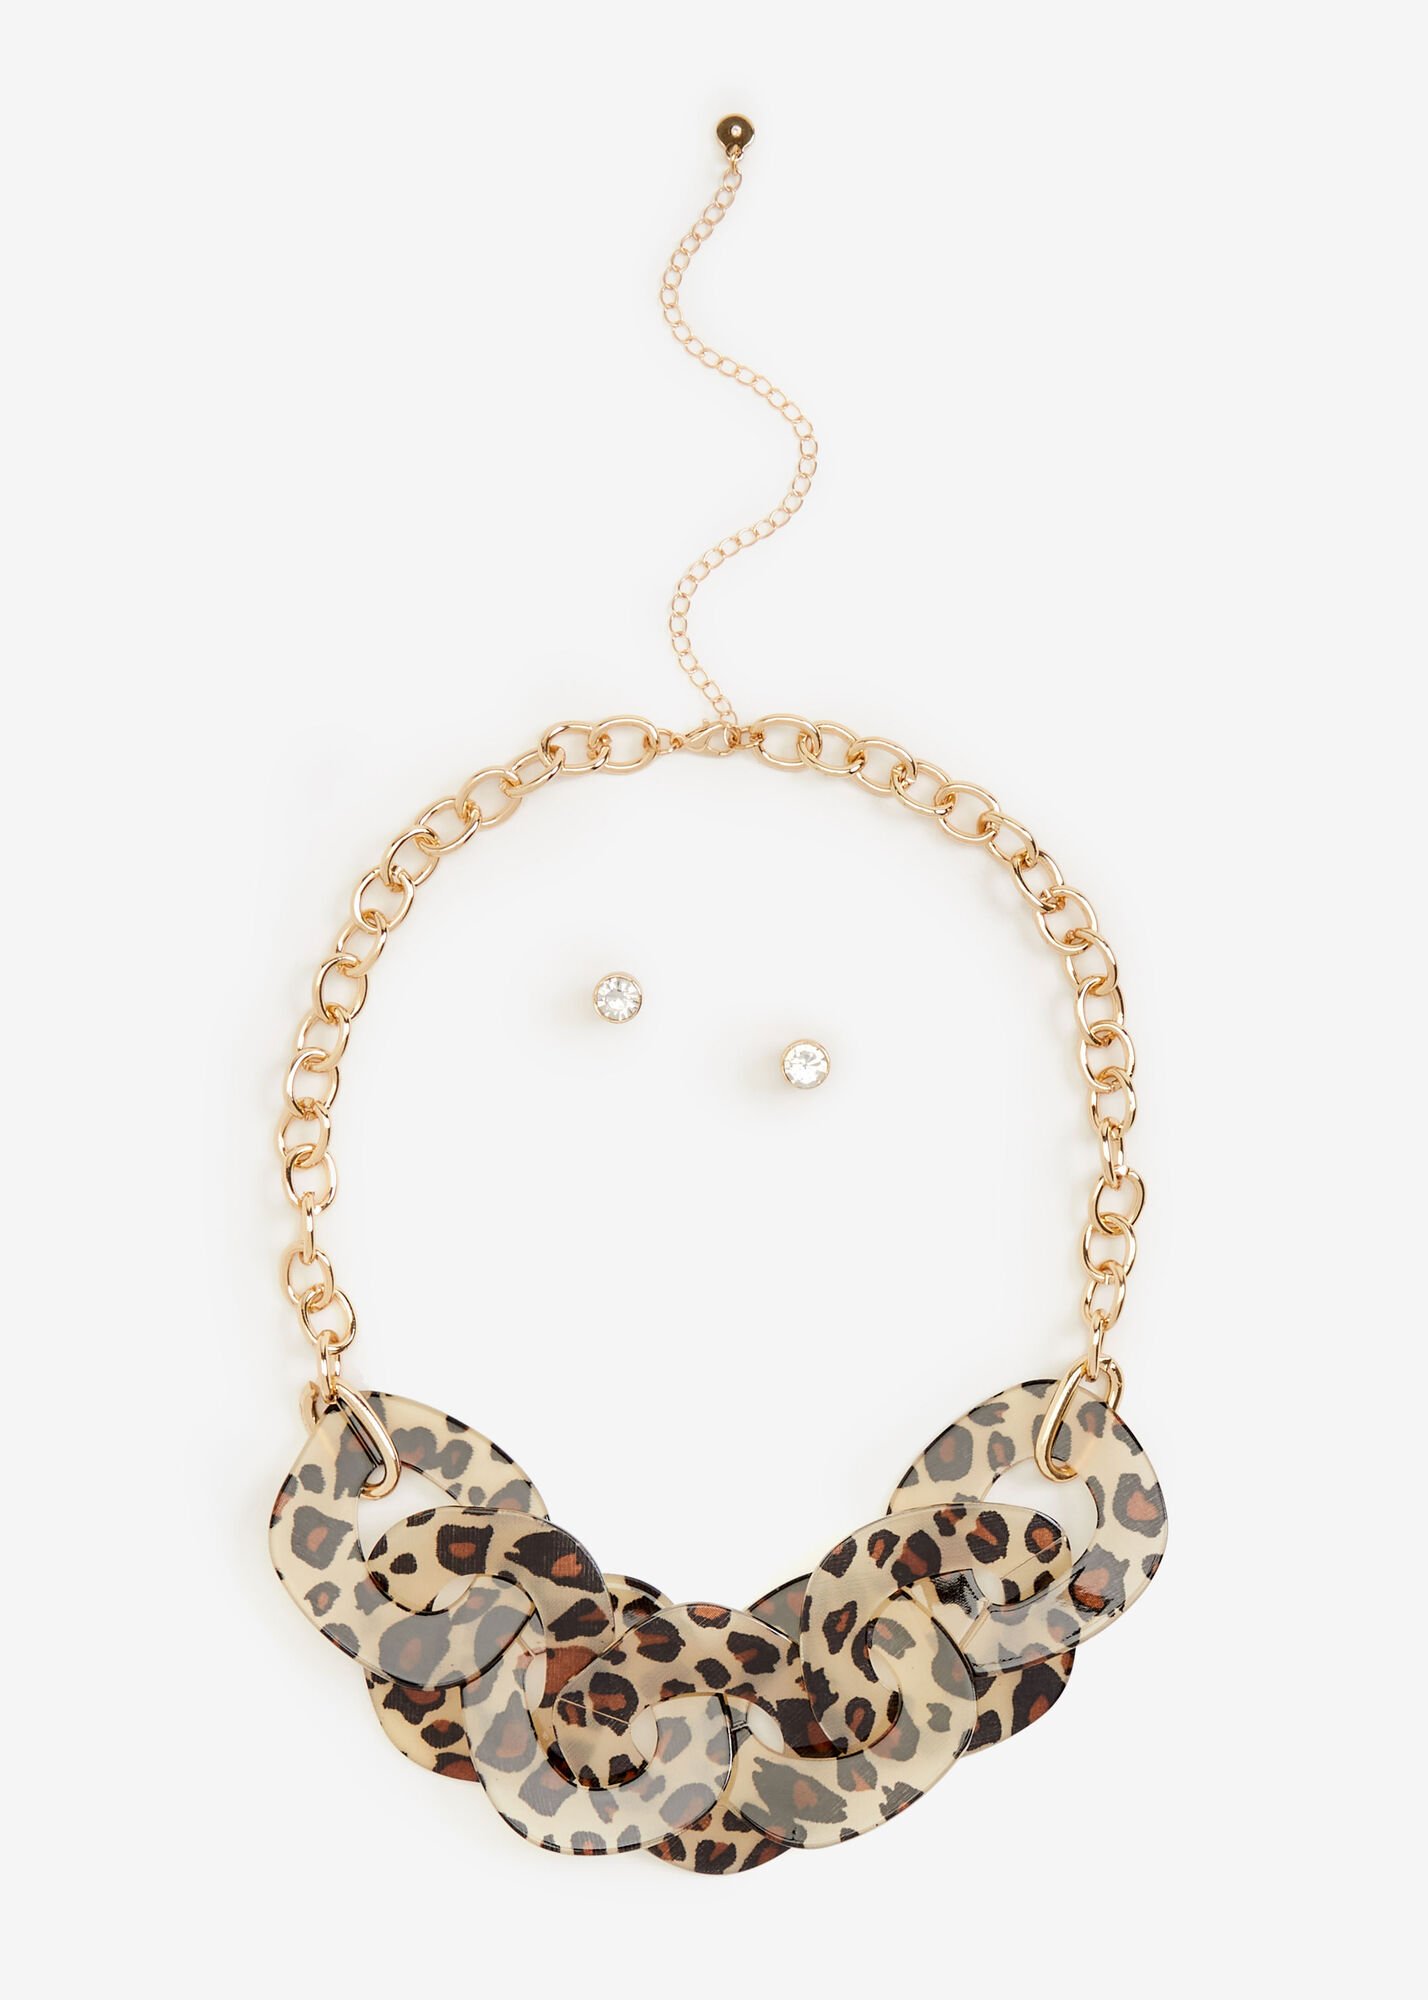 Statement Jewelry Gold Animal Print Chain Link Drop Oversize Necklace